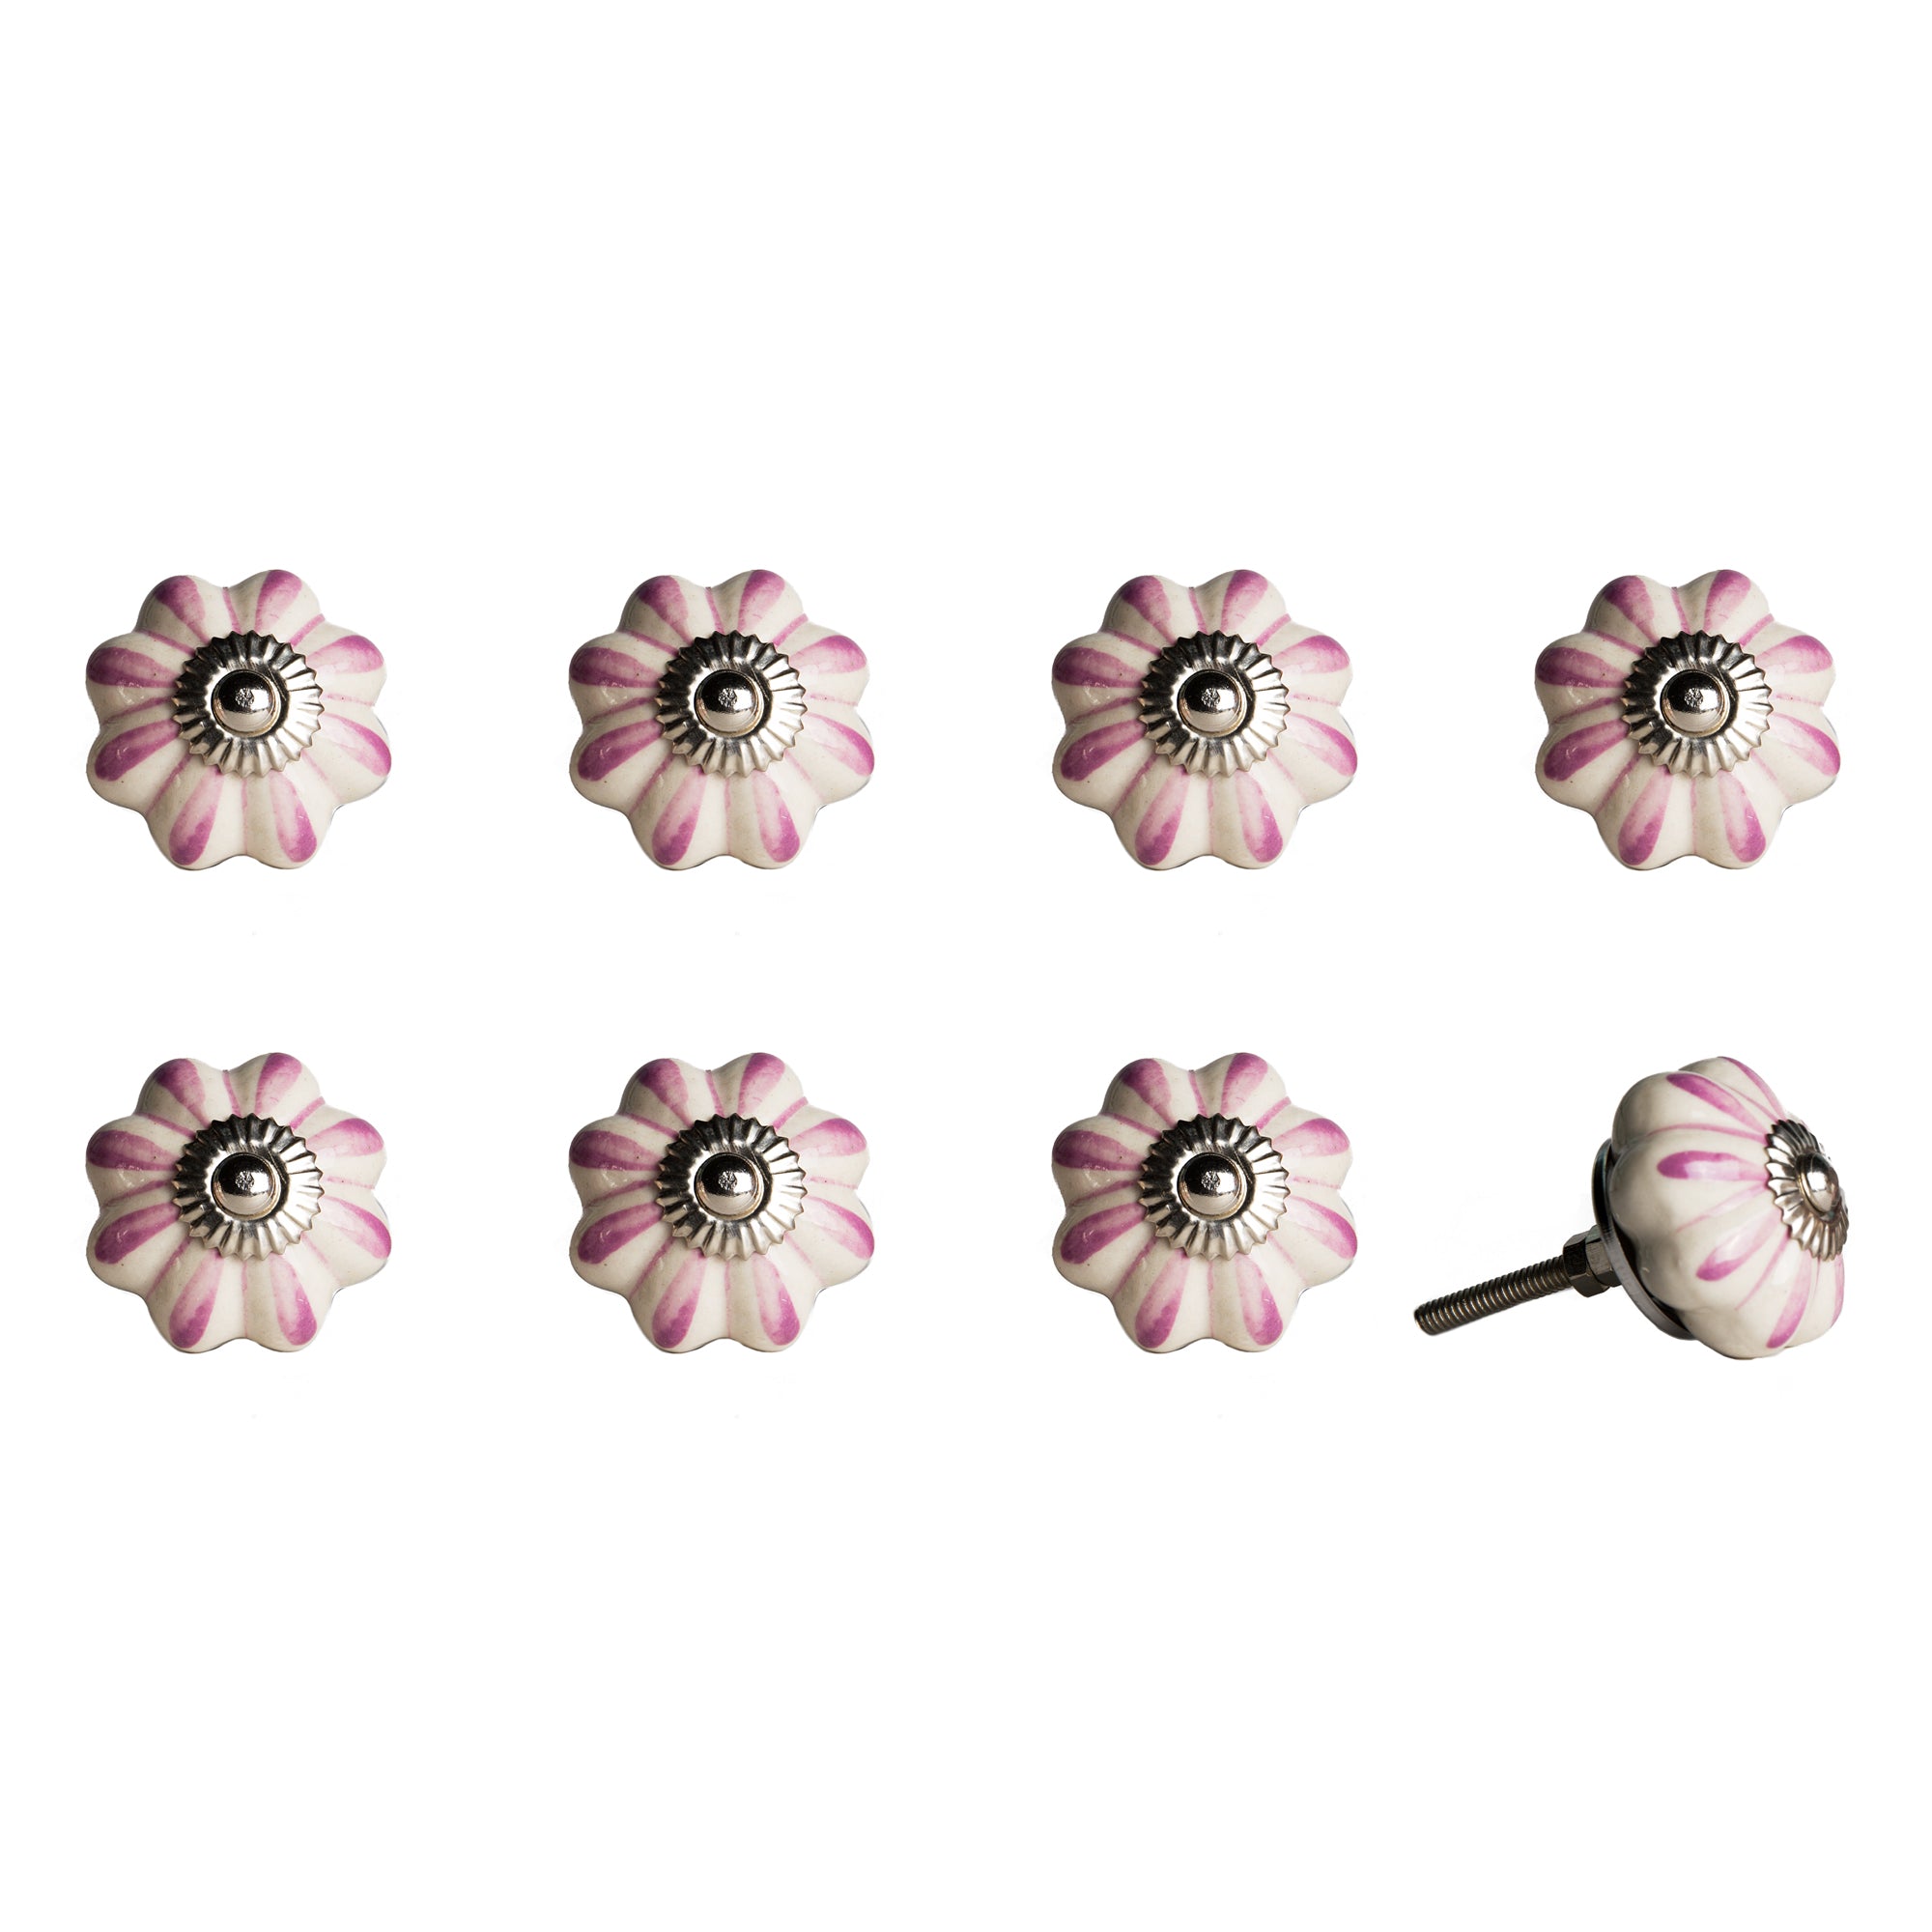 1.5" X 1.5" X 1.5" Hues Of Cream Pink And Silver  Knobs 8 Pack